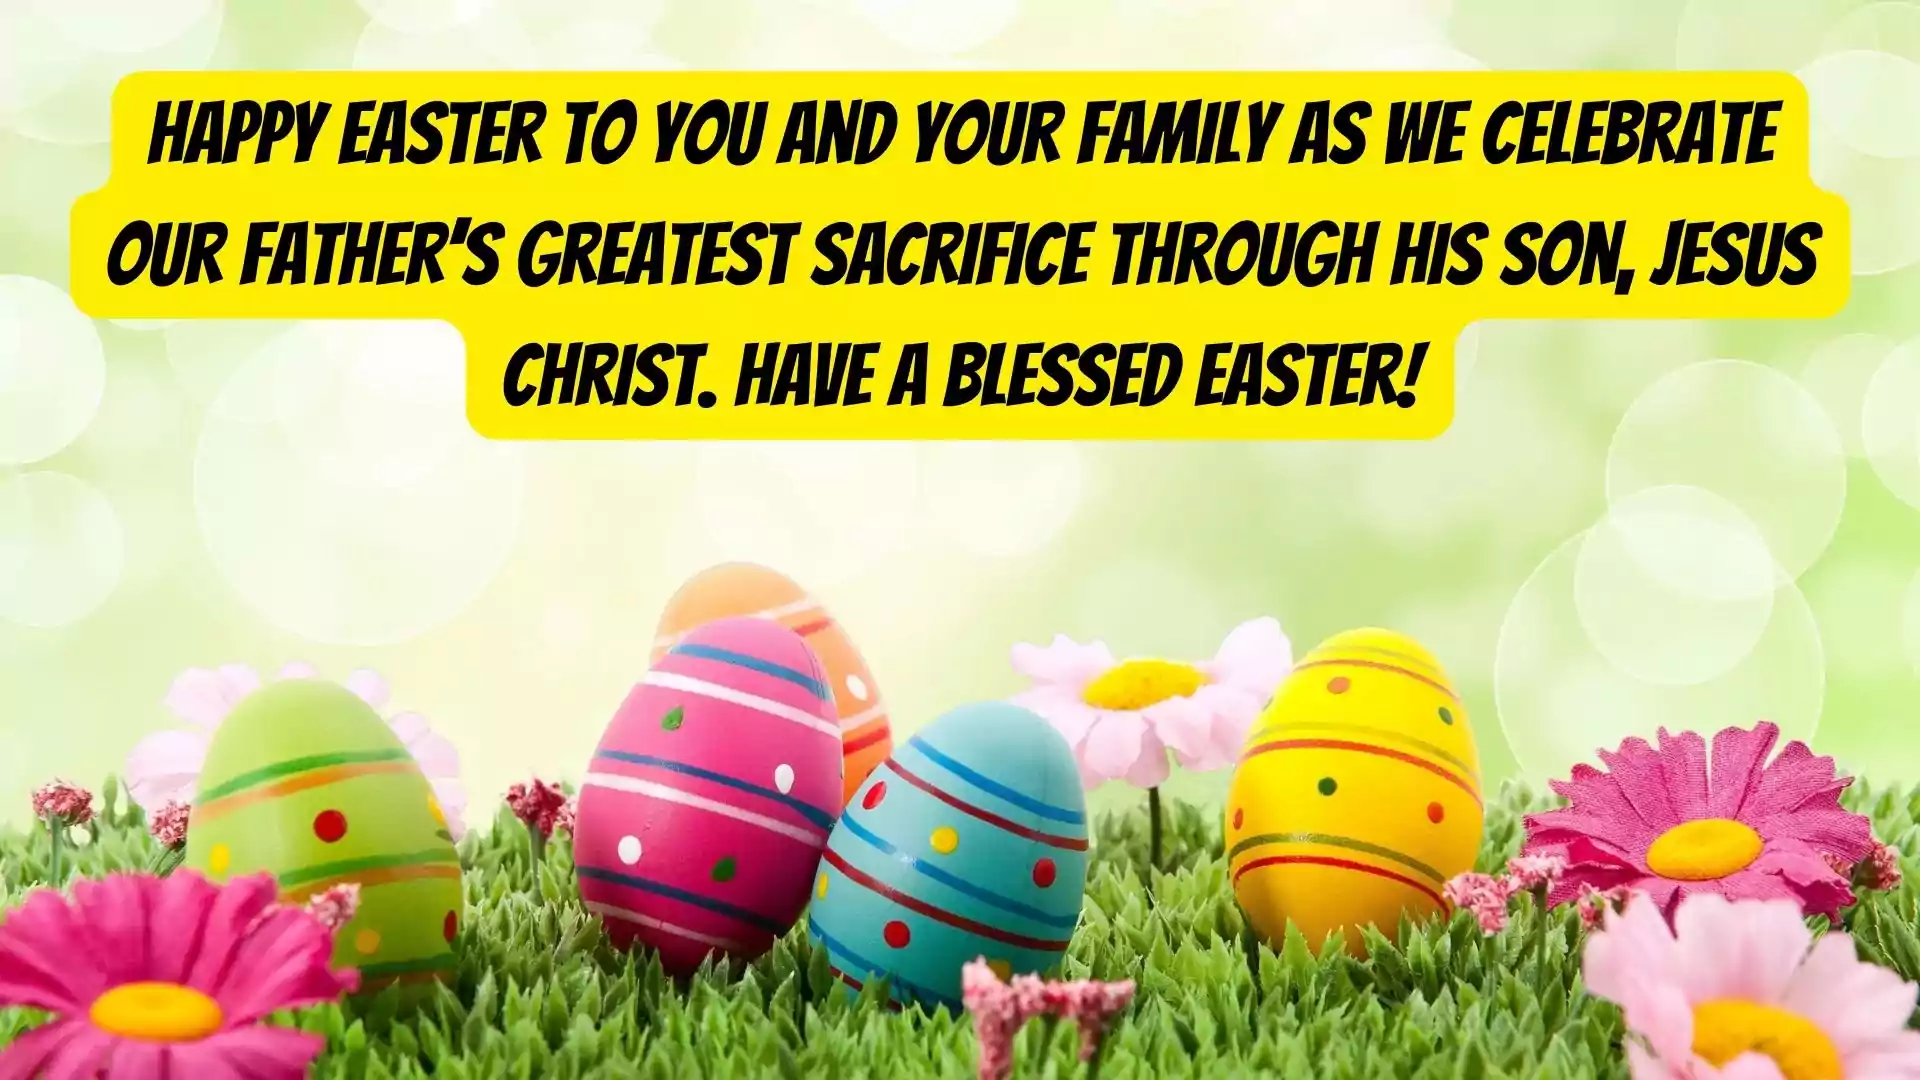 When is Easter Sunday 2022 quotes with image